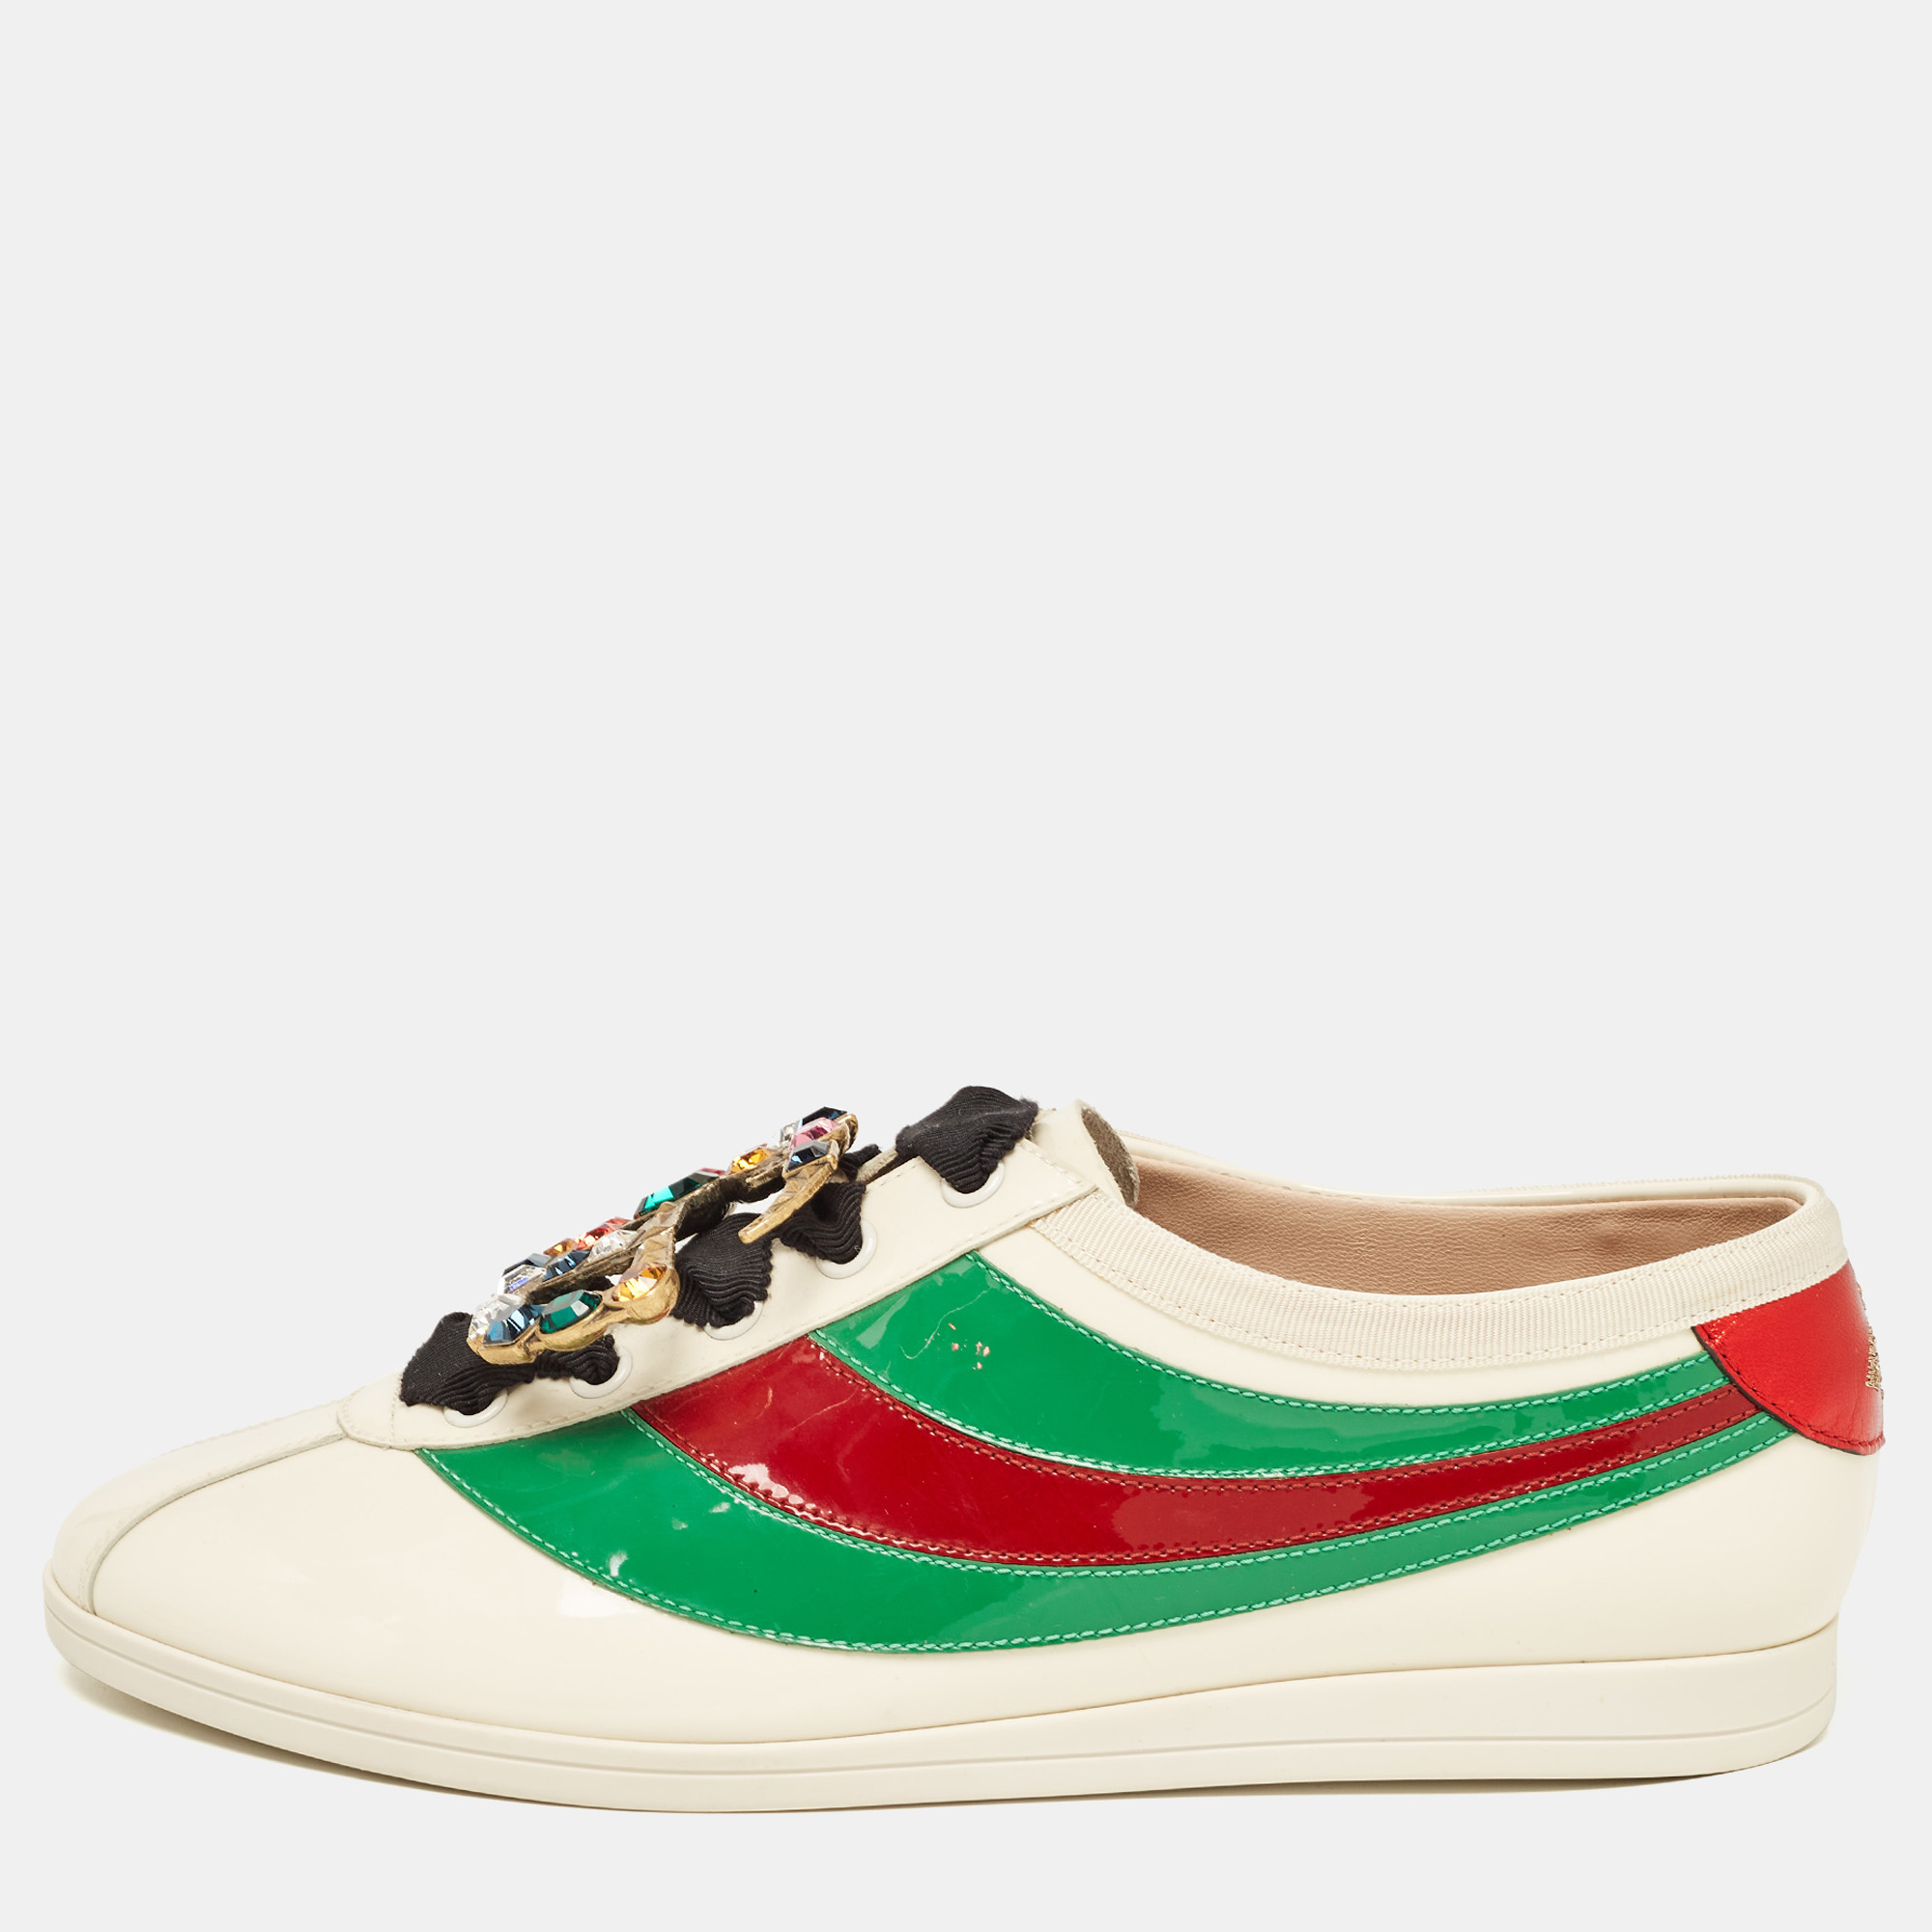 Gucci tricolor patent falacer crystal embellished low top  sneakers size 38